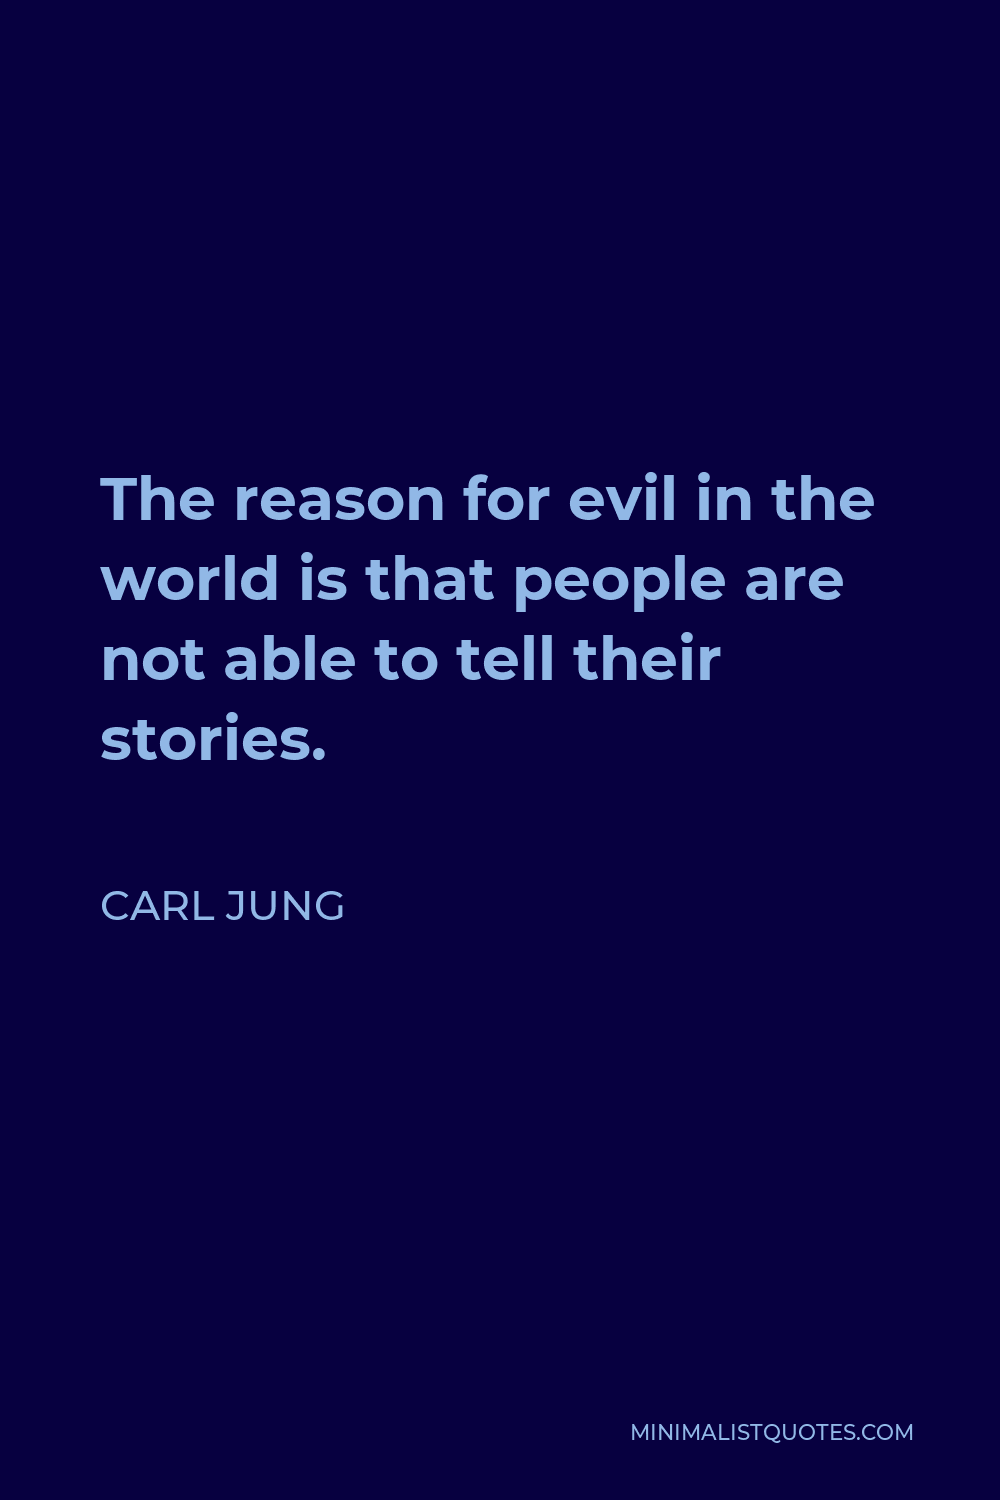 Carl Jung Quote - The reason for evil in the world is that people are not able to tell their stories.